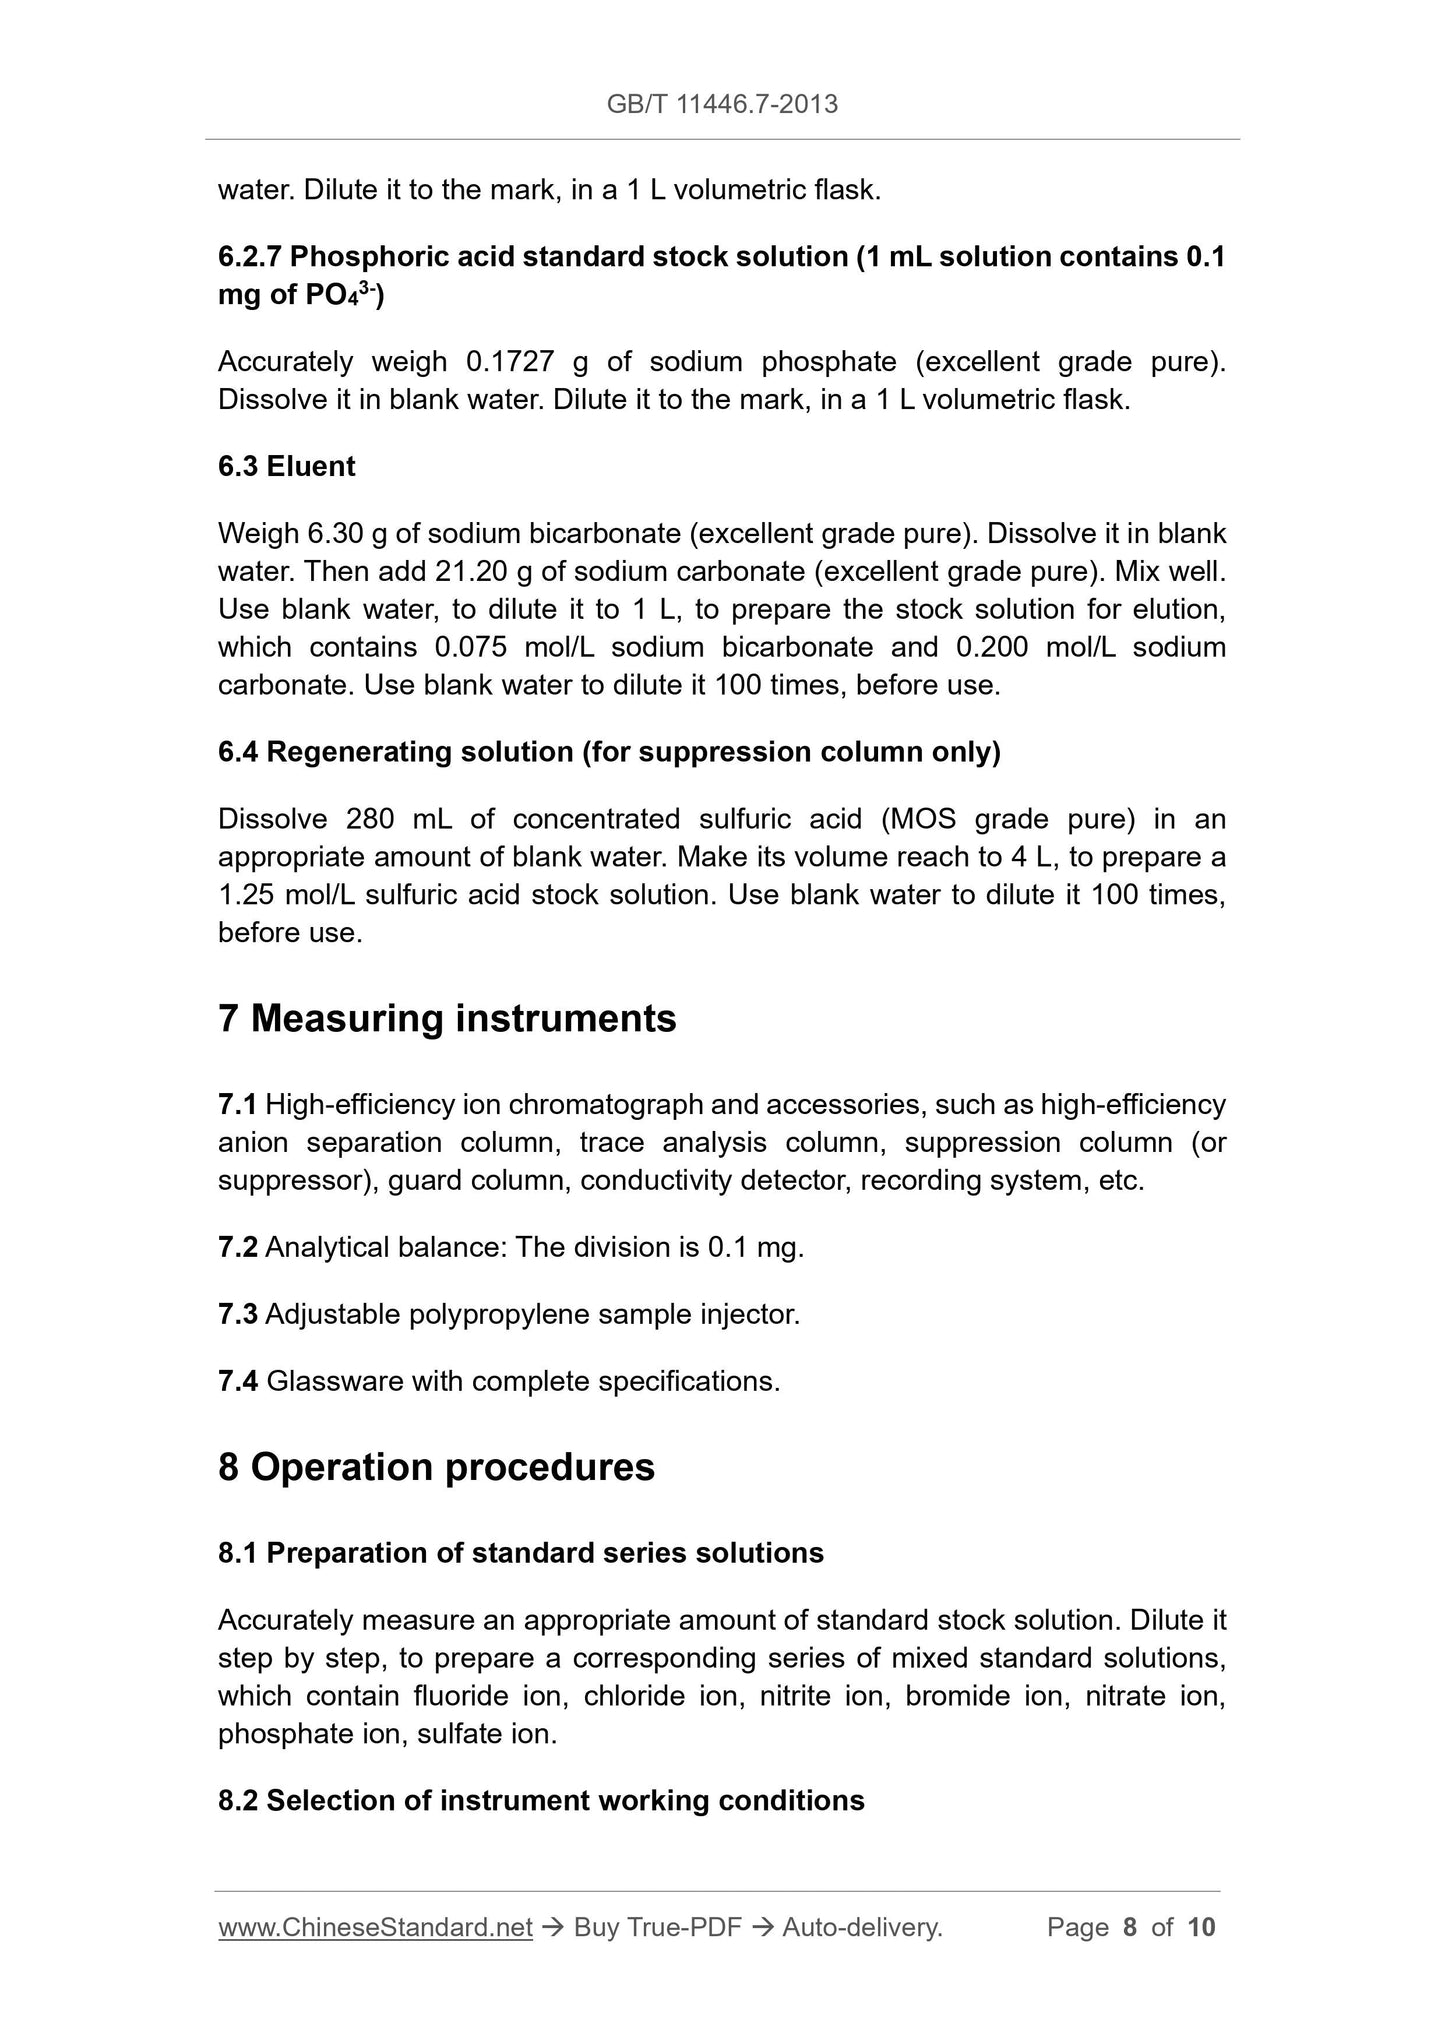 GB/T 11446.7-2013 Page 5